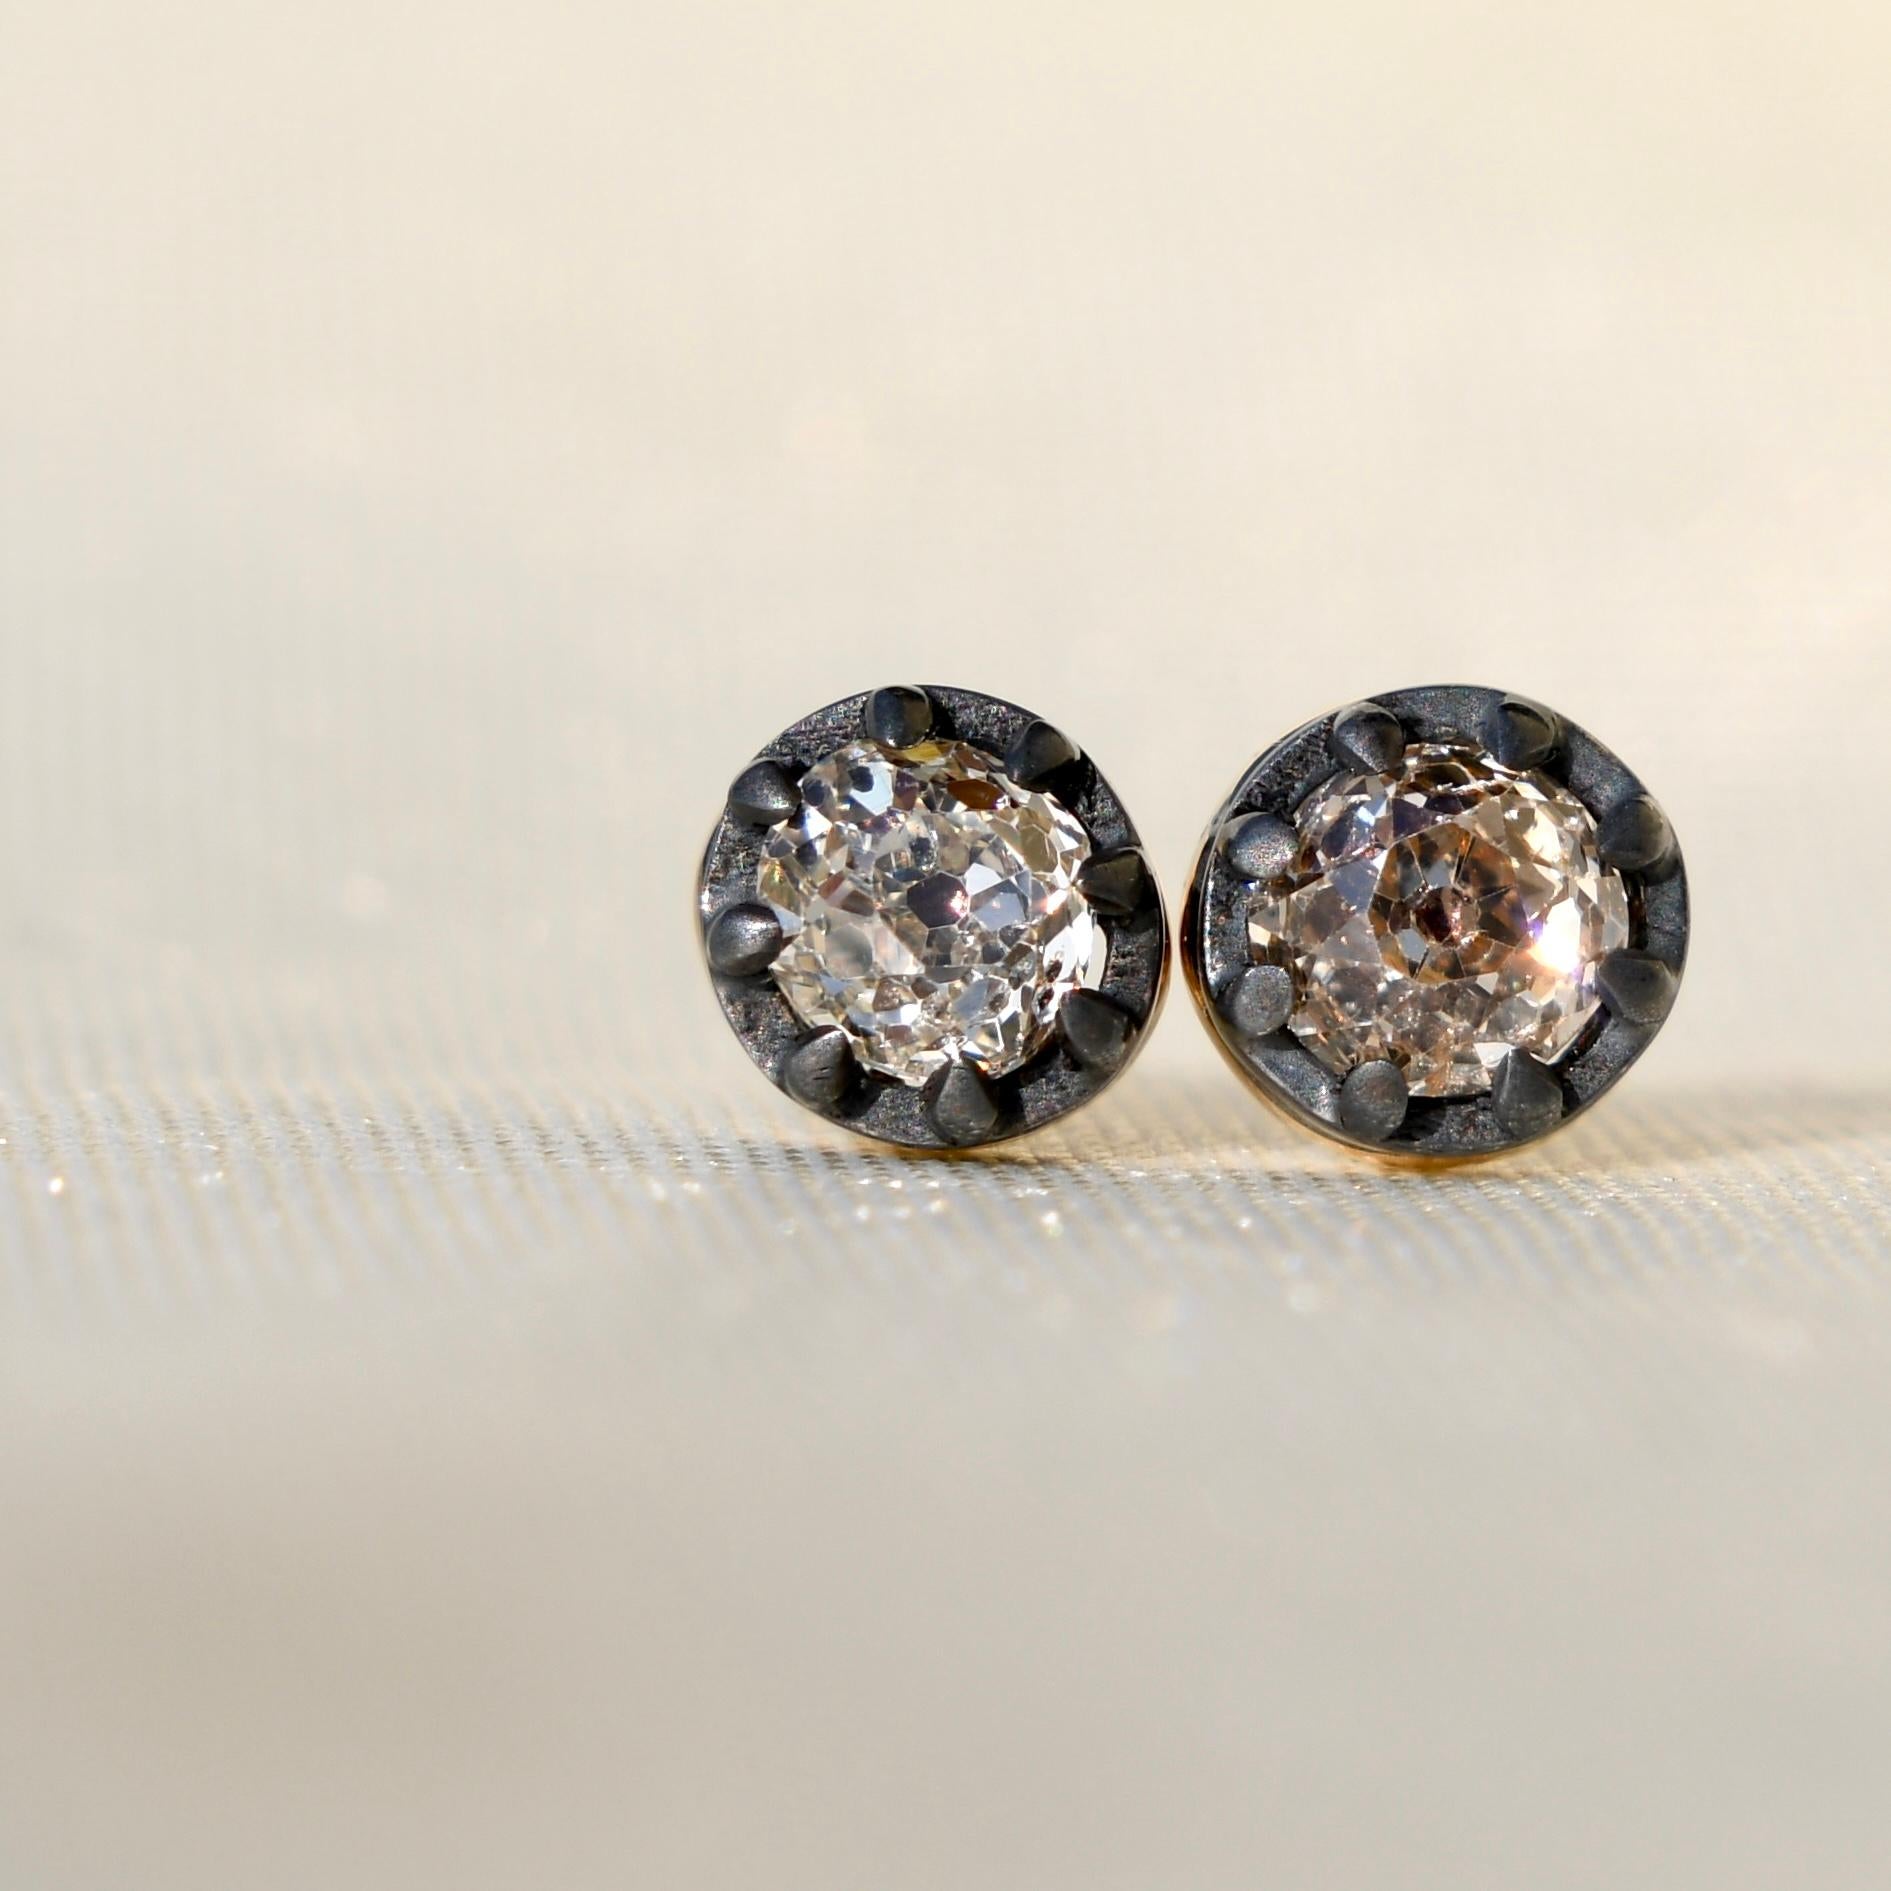 A pair of newly made studs featuring antique diamonds. The diamonds are in excellent condition.

- One old mine cut diamond, 0.32ct (N/ I1)
- One old mine cut diamond, 0.35ct (O-P/ I1) 
- Total diamond weight: 0.67 ct
- 750/ 18k solid yellow gold